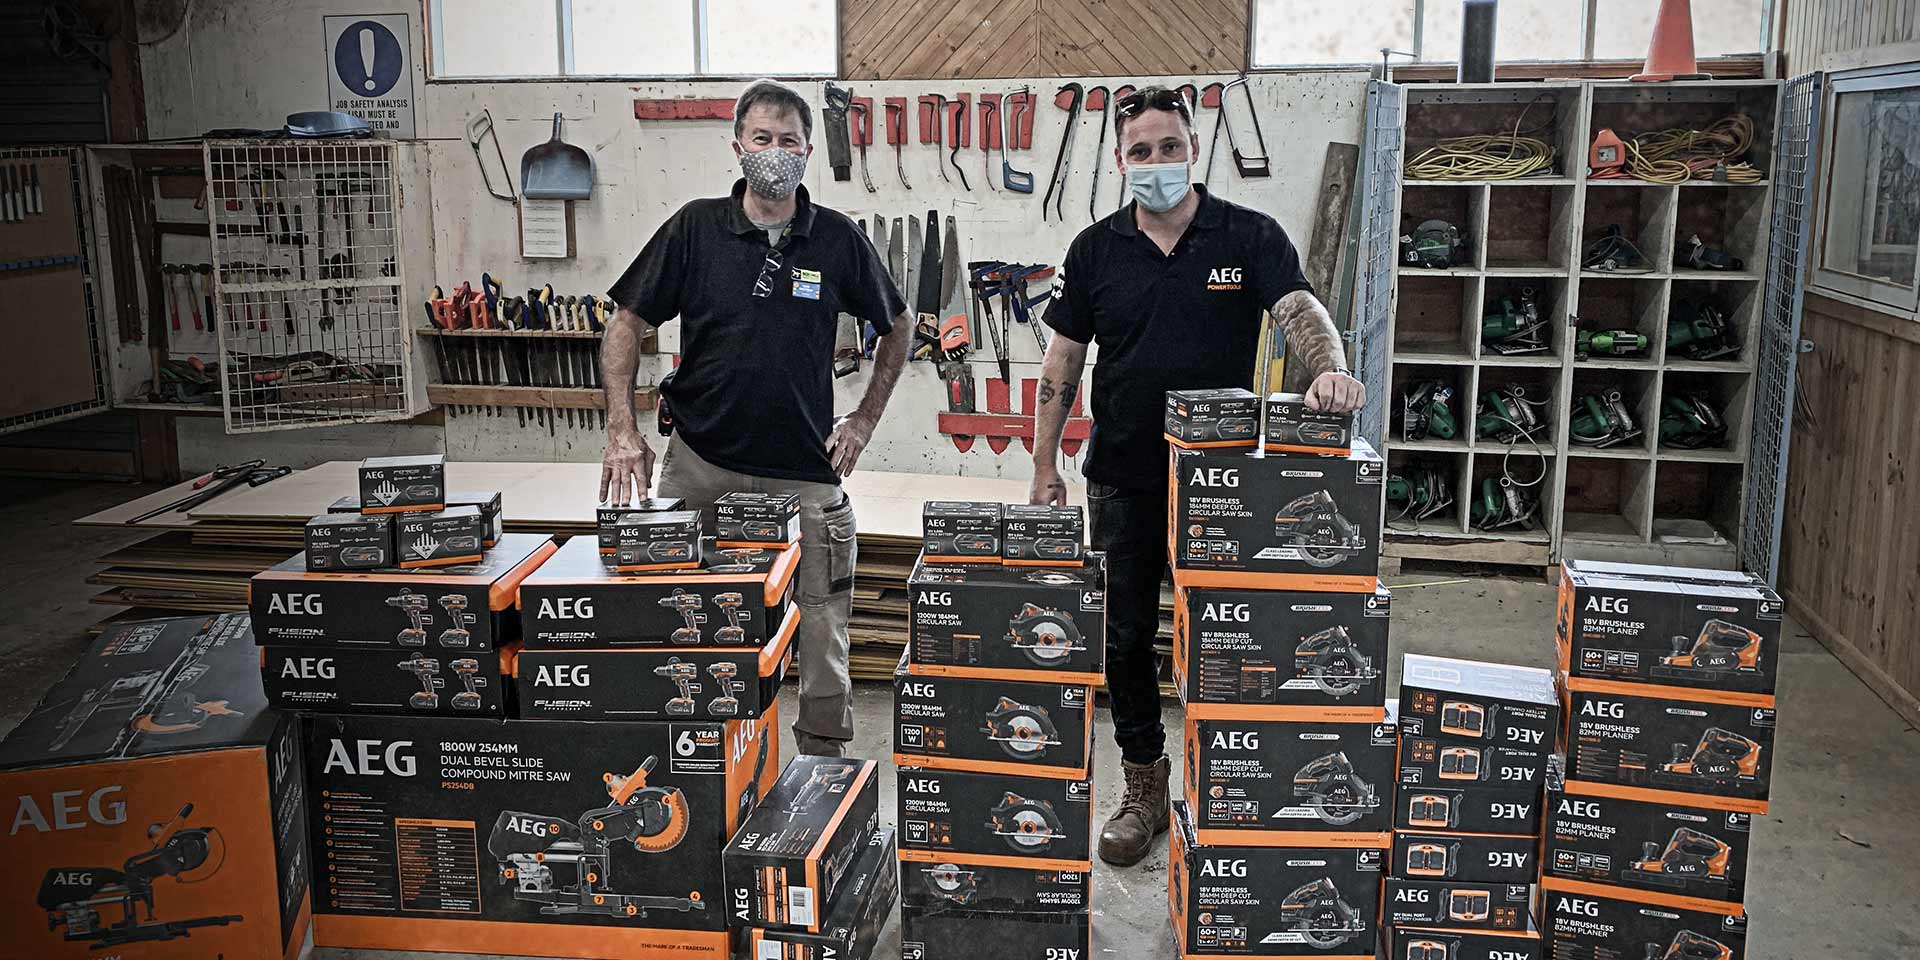 An AEG Onsite rep and a trades person stand behind a tall stack of AEG powertools